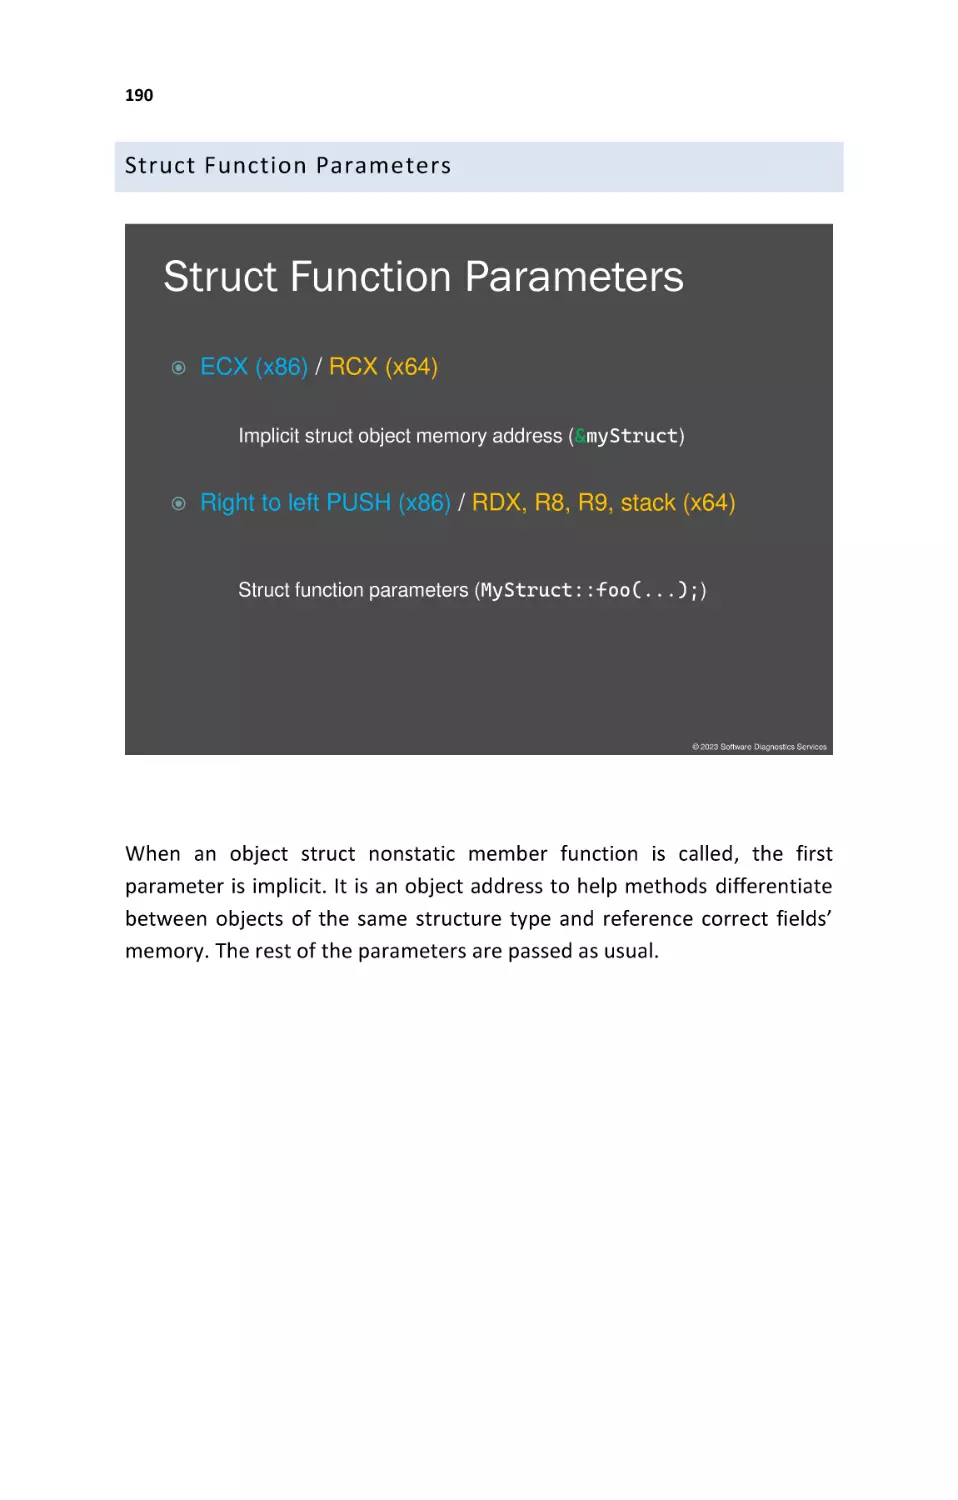 Struct Function Parameters